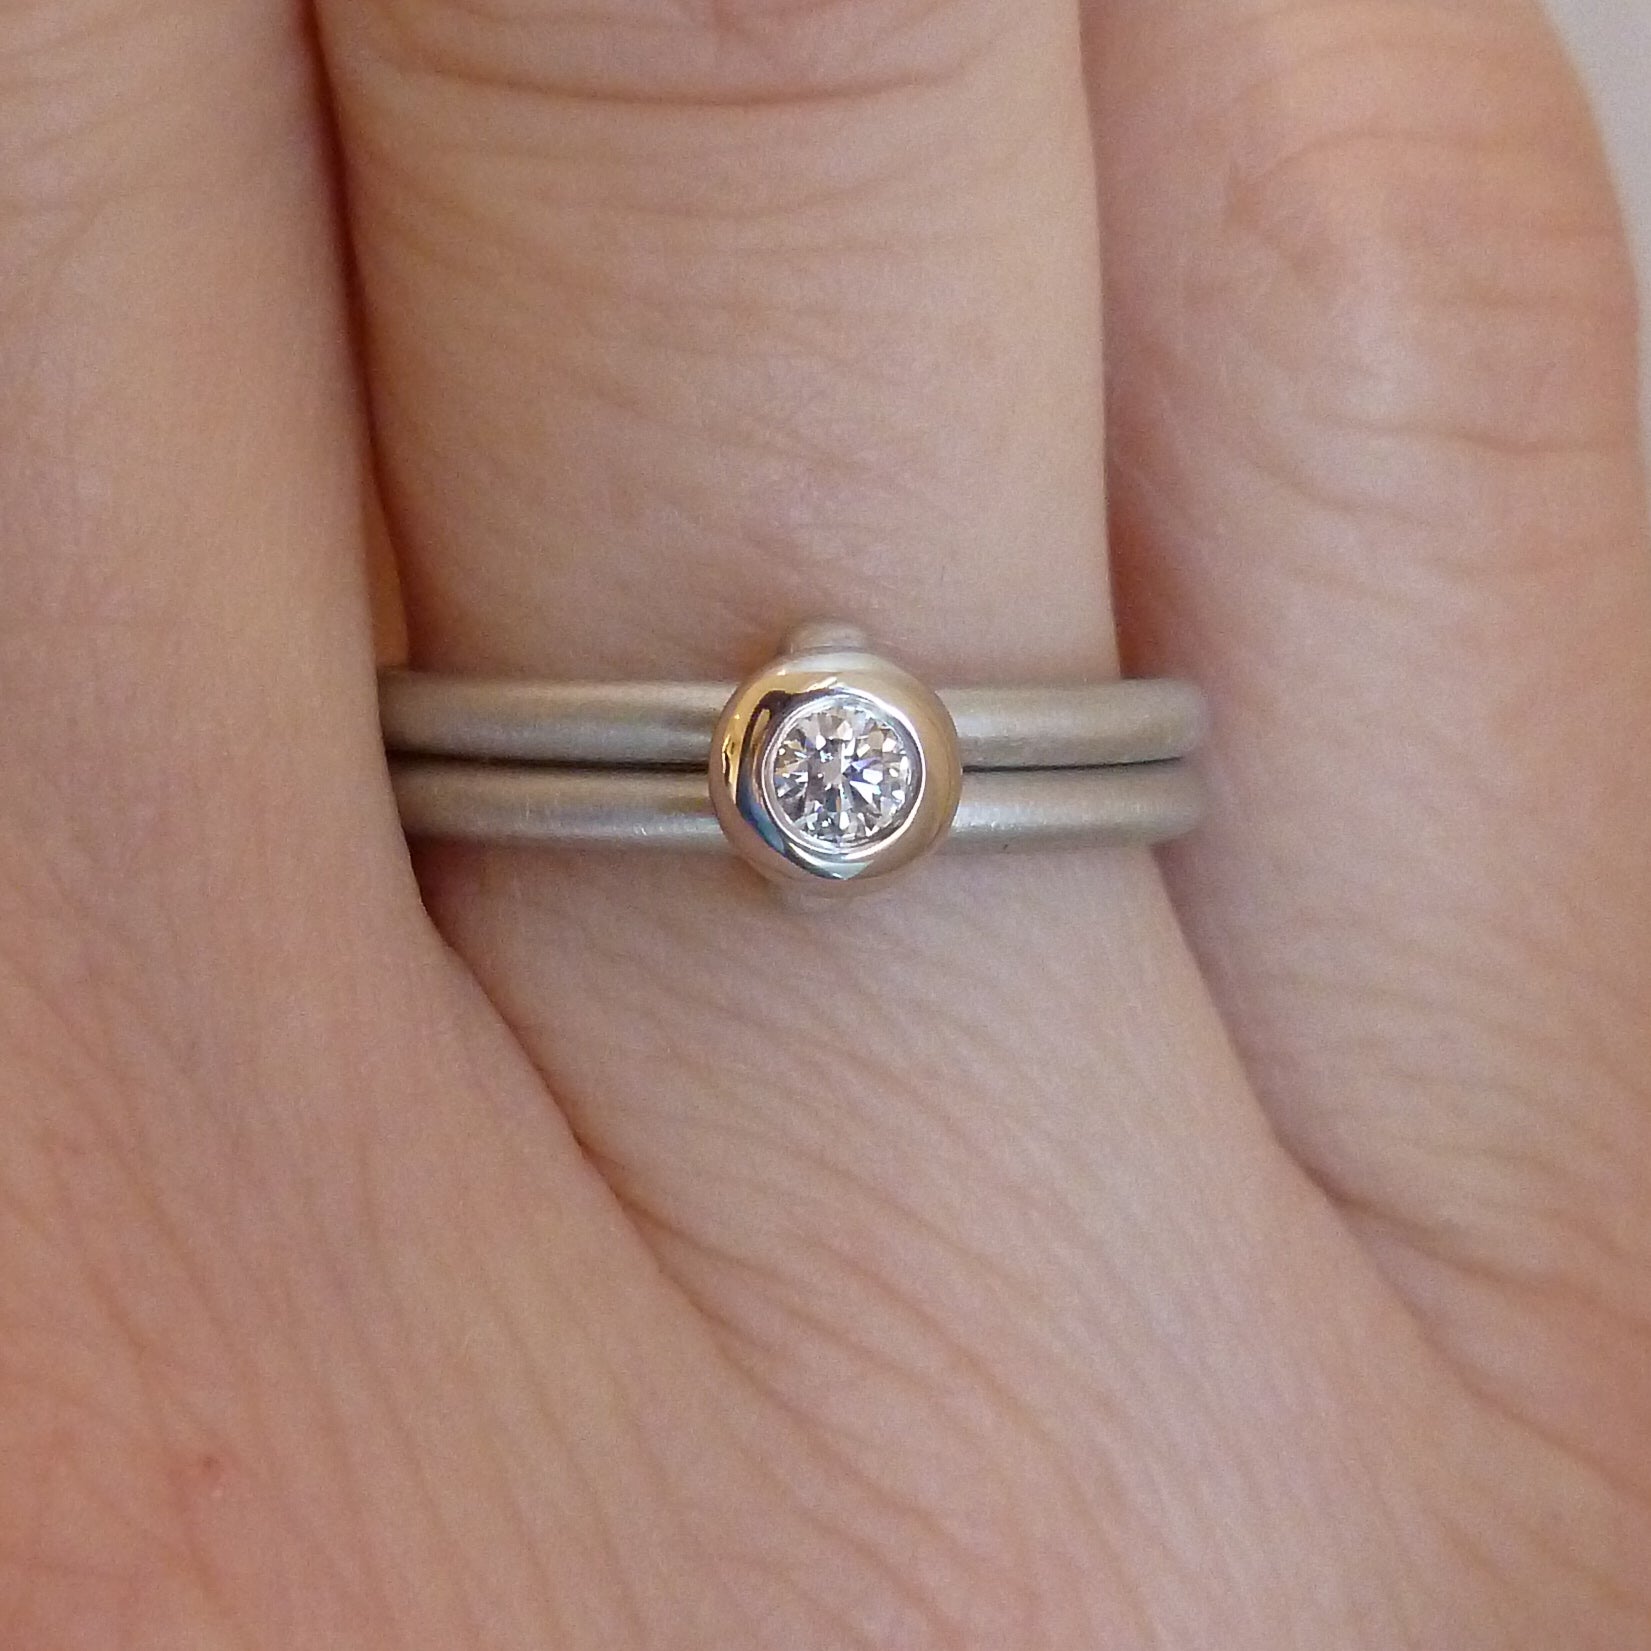 Contemporary platinum two band engagement ring with diamond. Bespoke. Multi band ring or interlocking ring, sometimes called double band ring too.